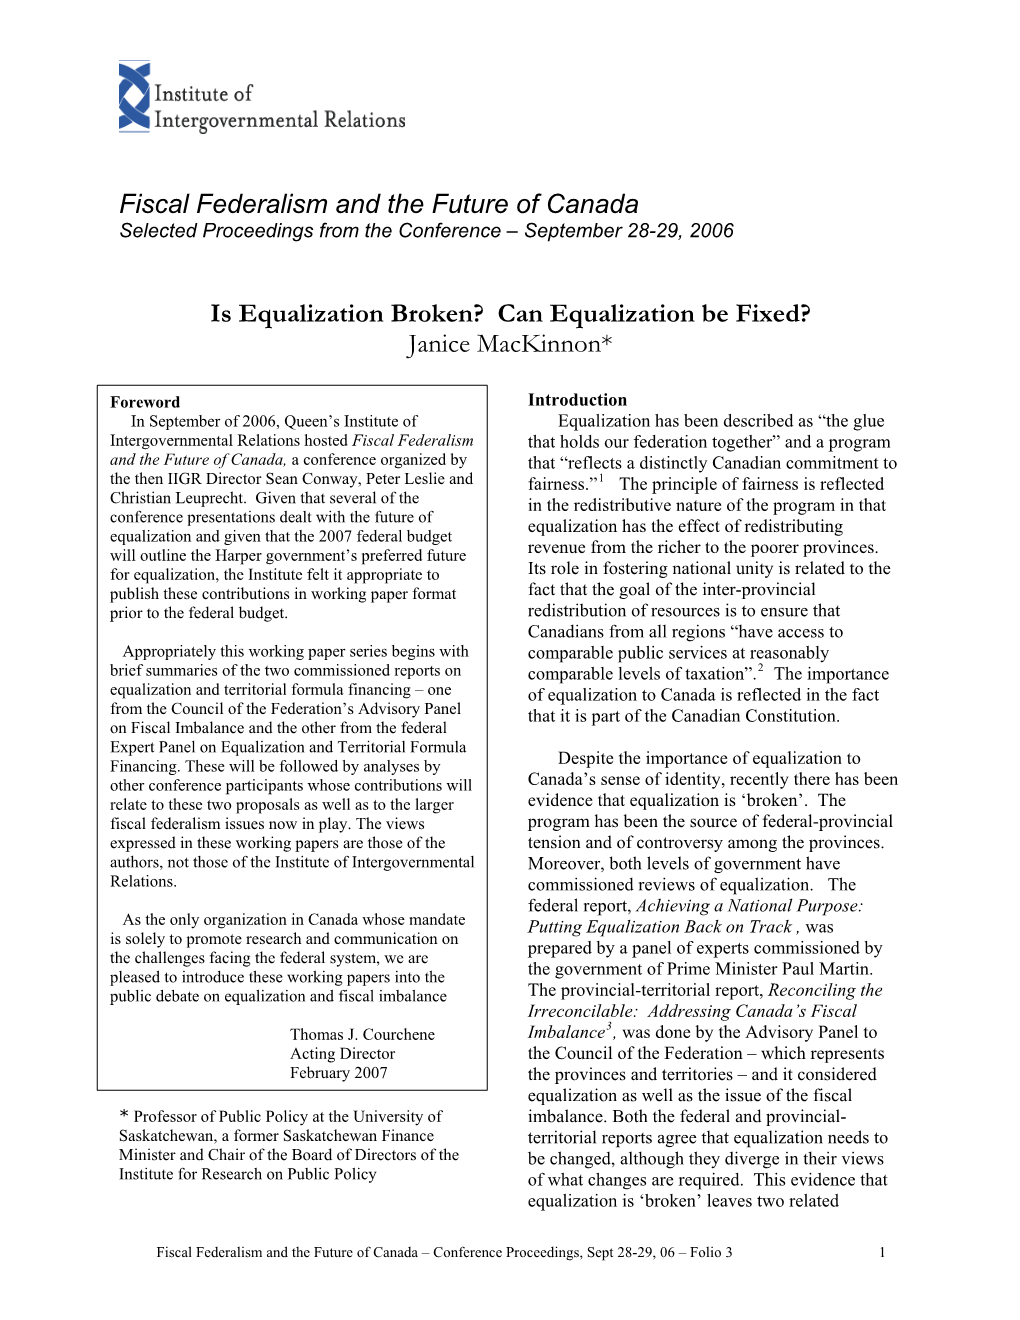 Is Equalization Broken? Can Equalization Be Fixed? Janice Mackinnon*